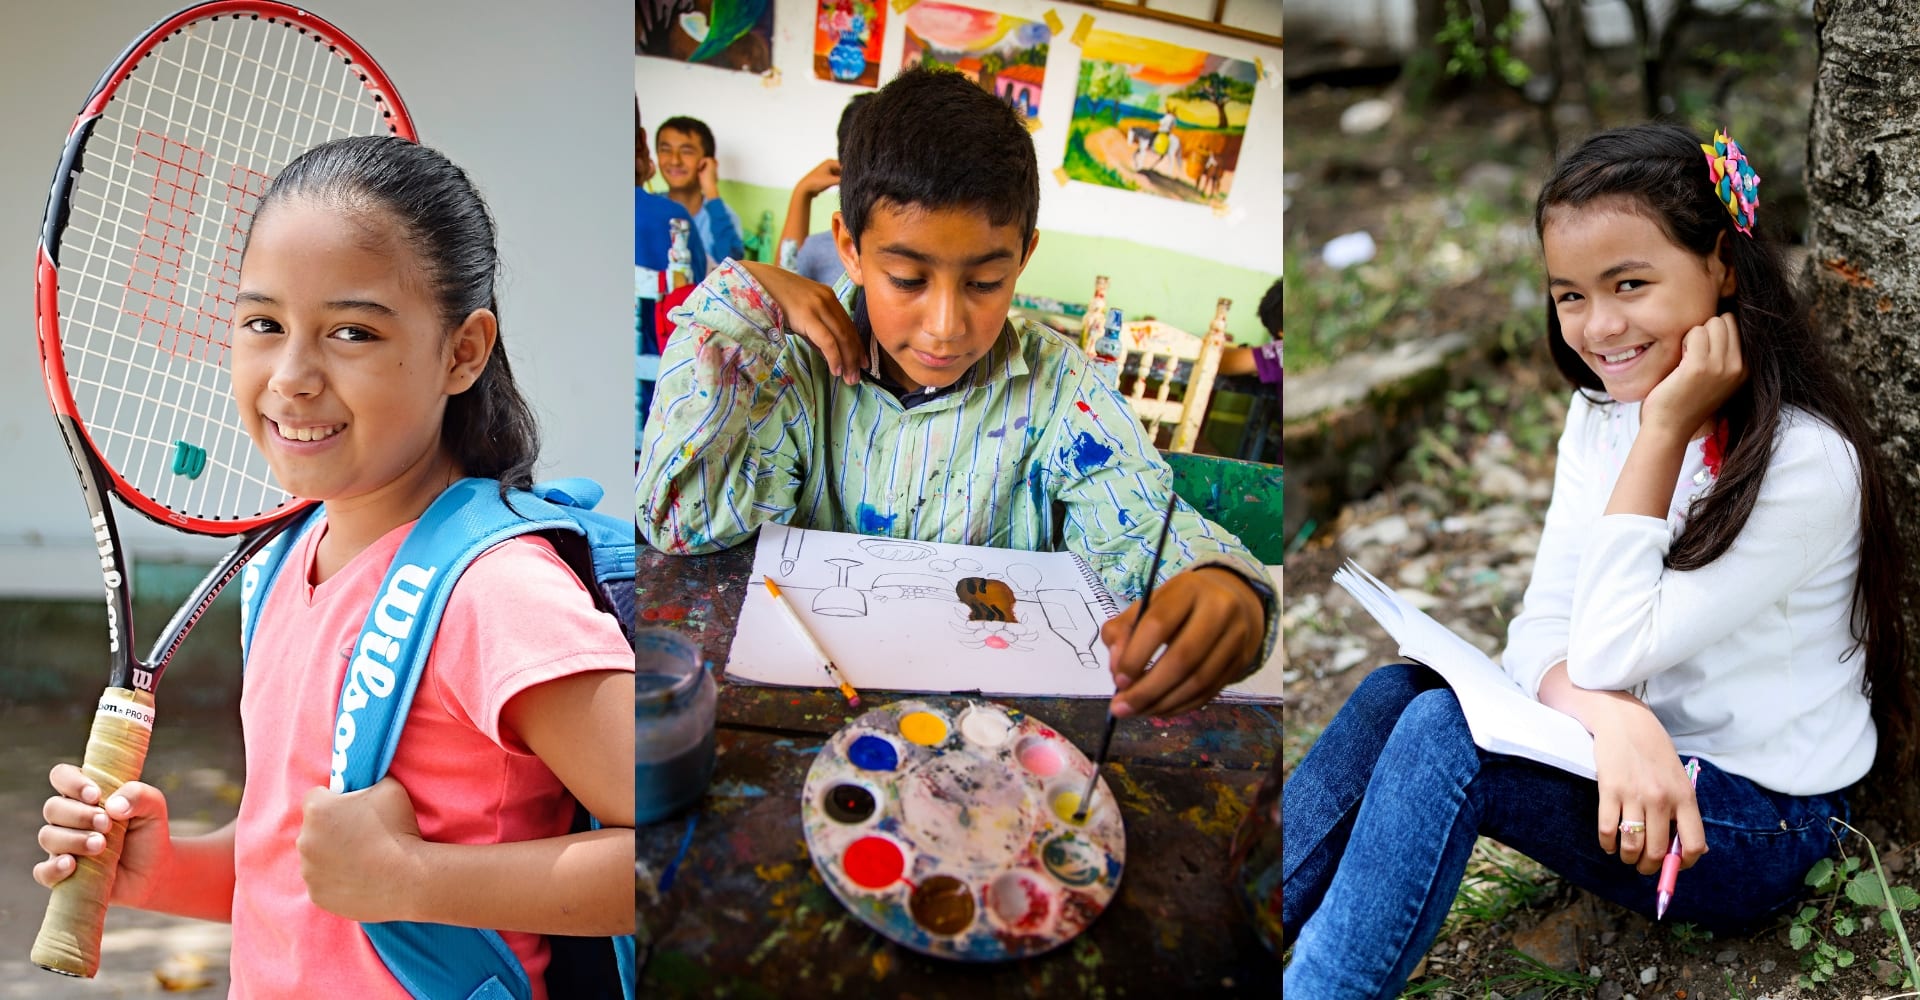 A collage of three kids featured in this post. On the left is Alondra, holding a tennis racquet and carrying a blue backpack. In the middle is Hector, wearing a green paint smock and working on a painting. On the right is Nazareth, who sits with her back against a tree with an open notebook on her lap.